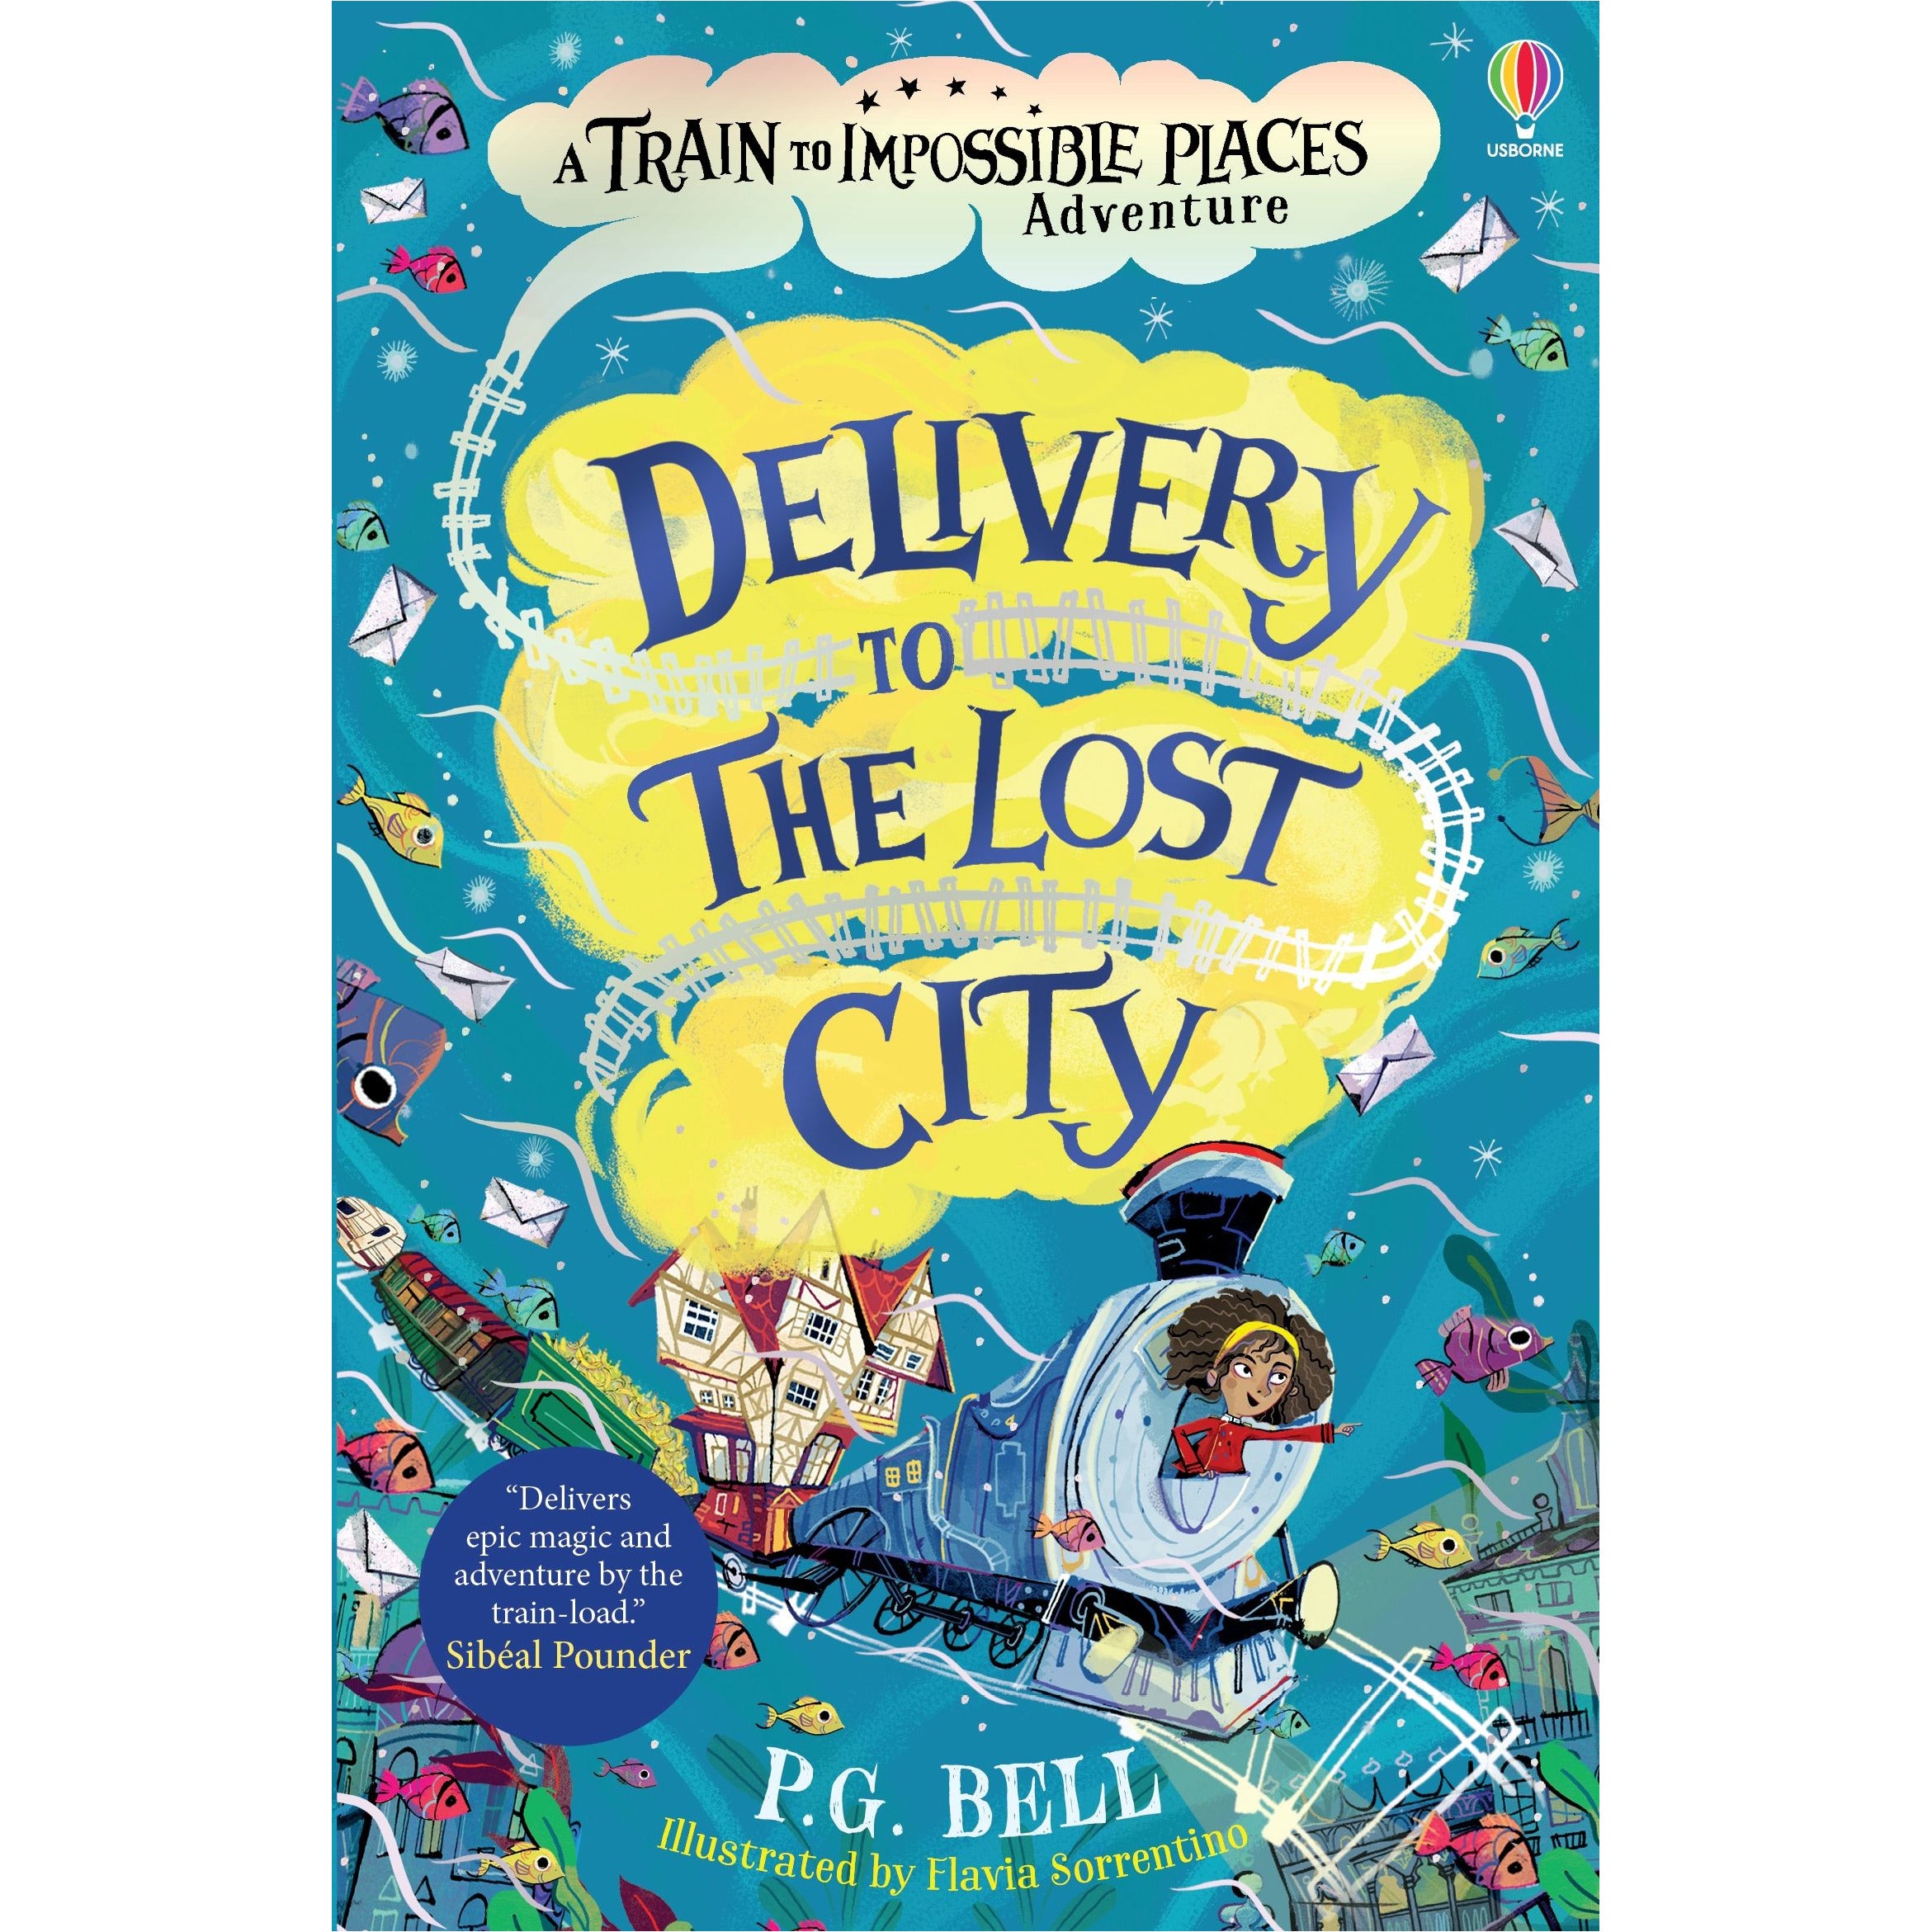 Delivery to the Lost City - P.G. Bell